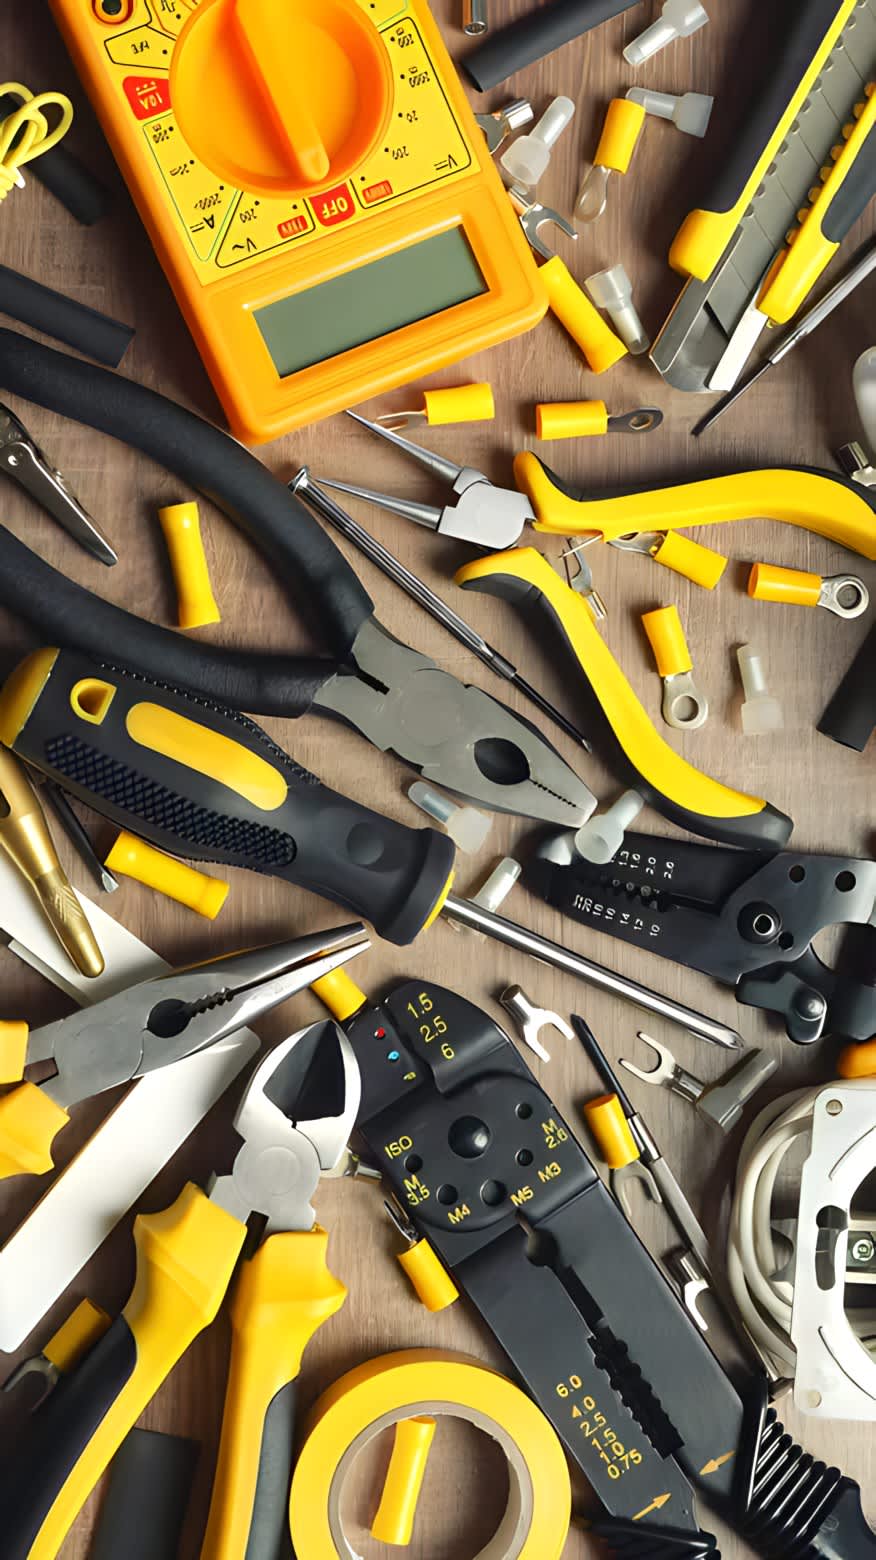 Assortment of tools and tool accessories